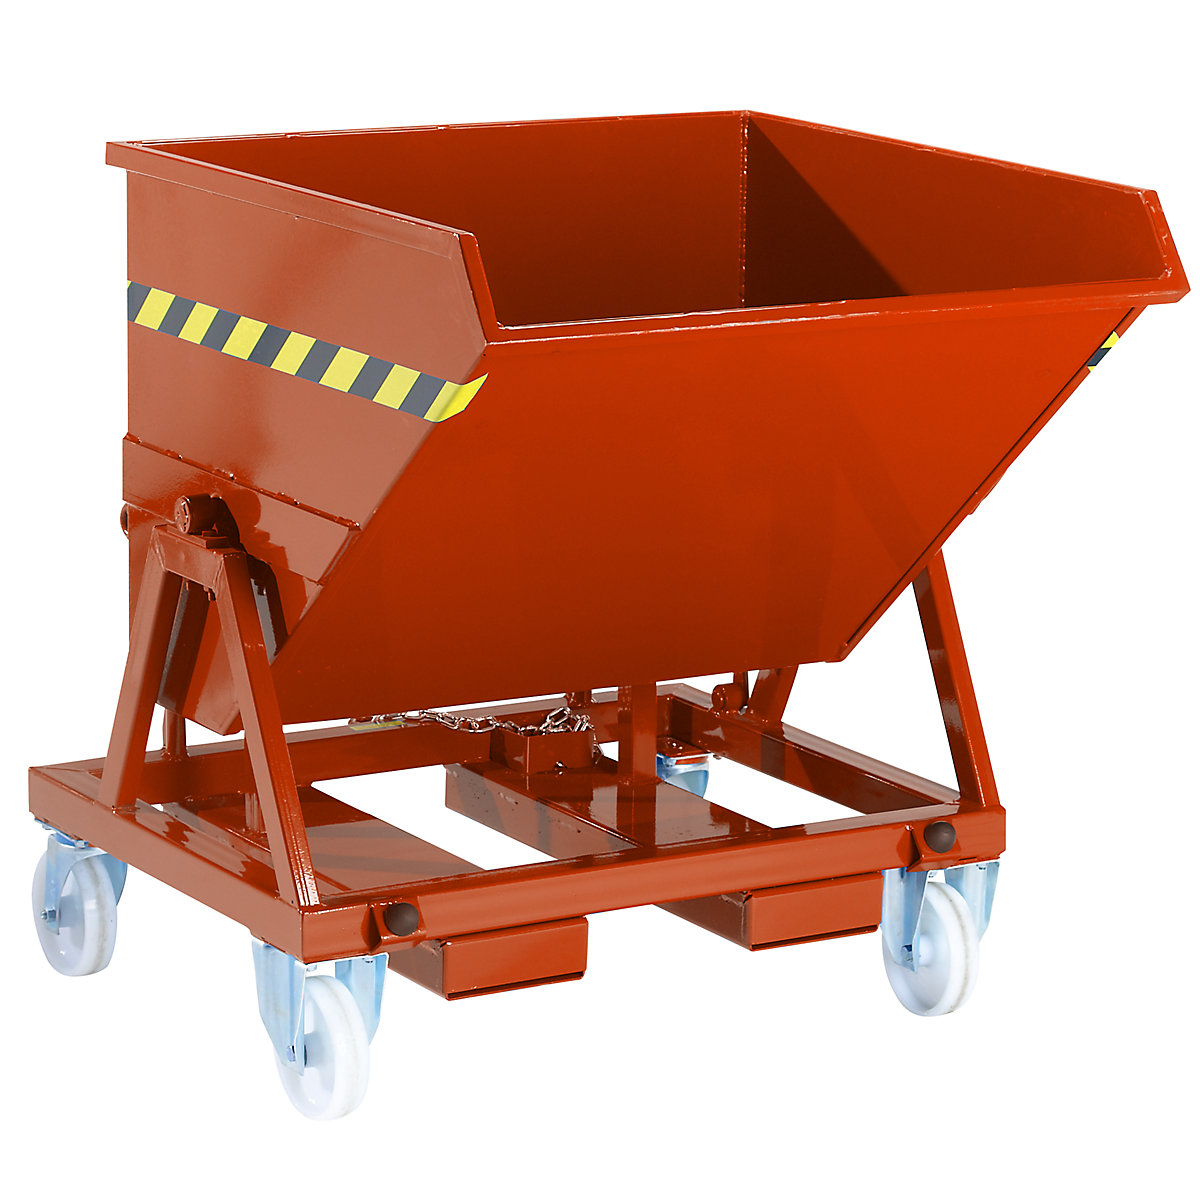 Mobile tilting skip with tilting mechanism, without sieve insert, max. load 1000 kg, capacity 0.675 m³-7